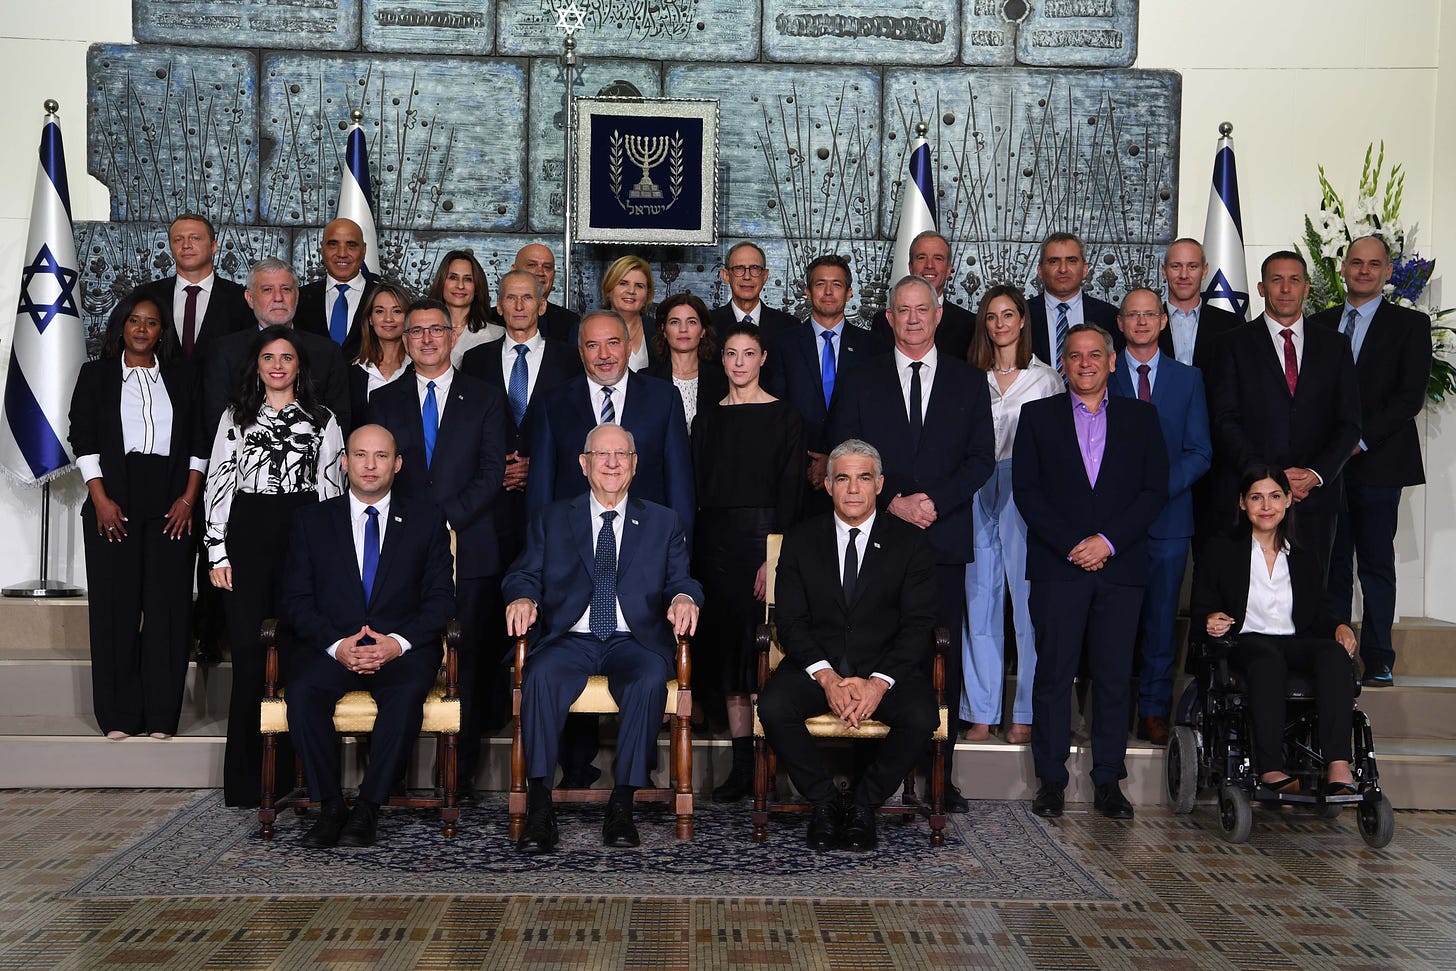 Thirty-sixth government of Israel - Wikipedia